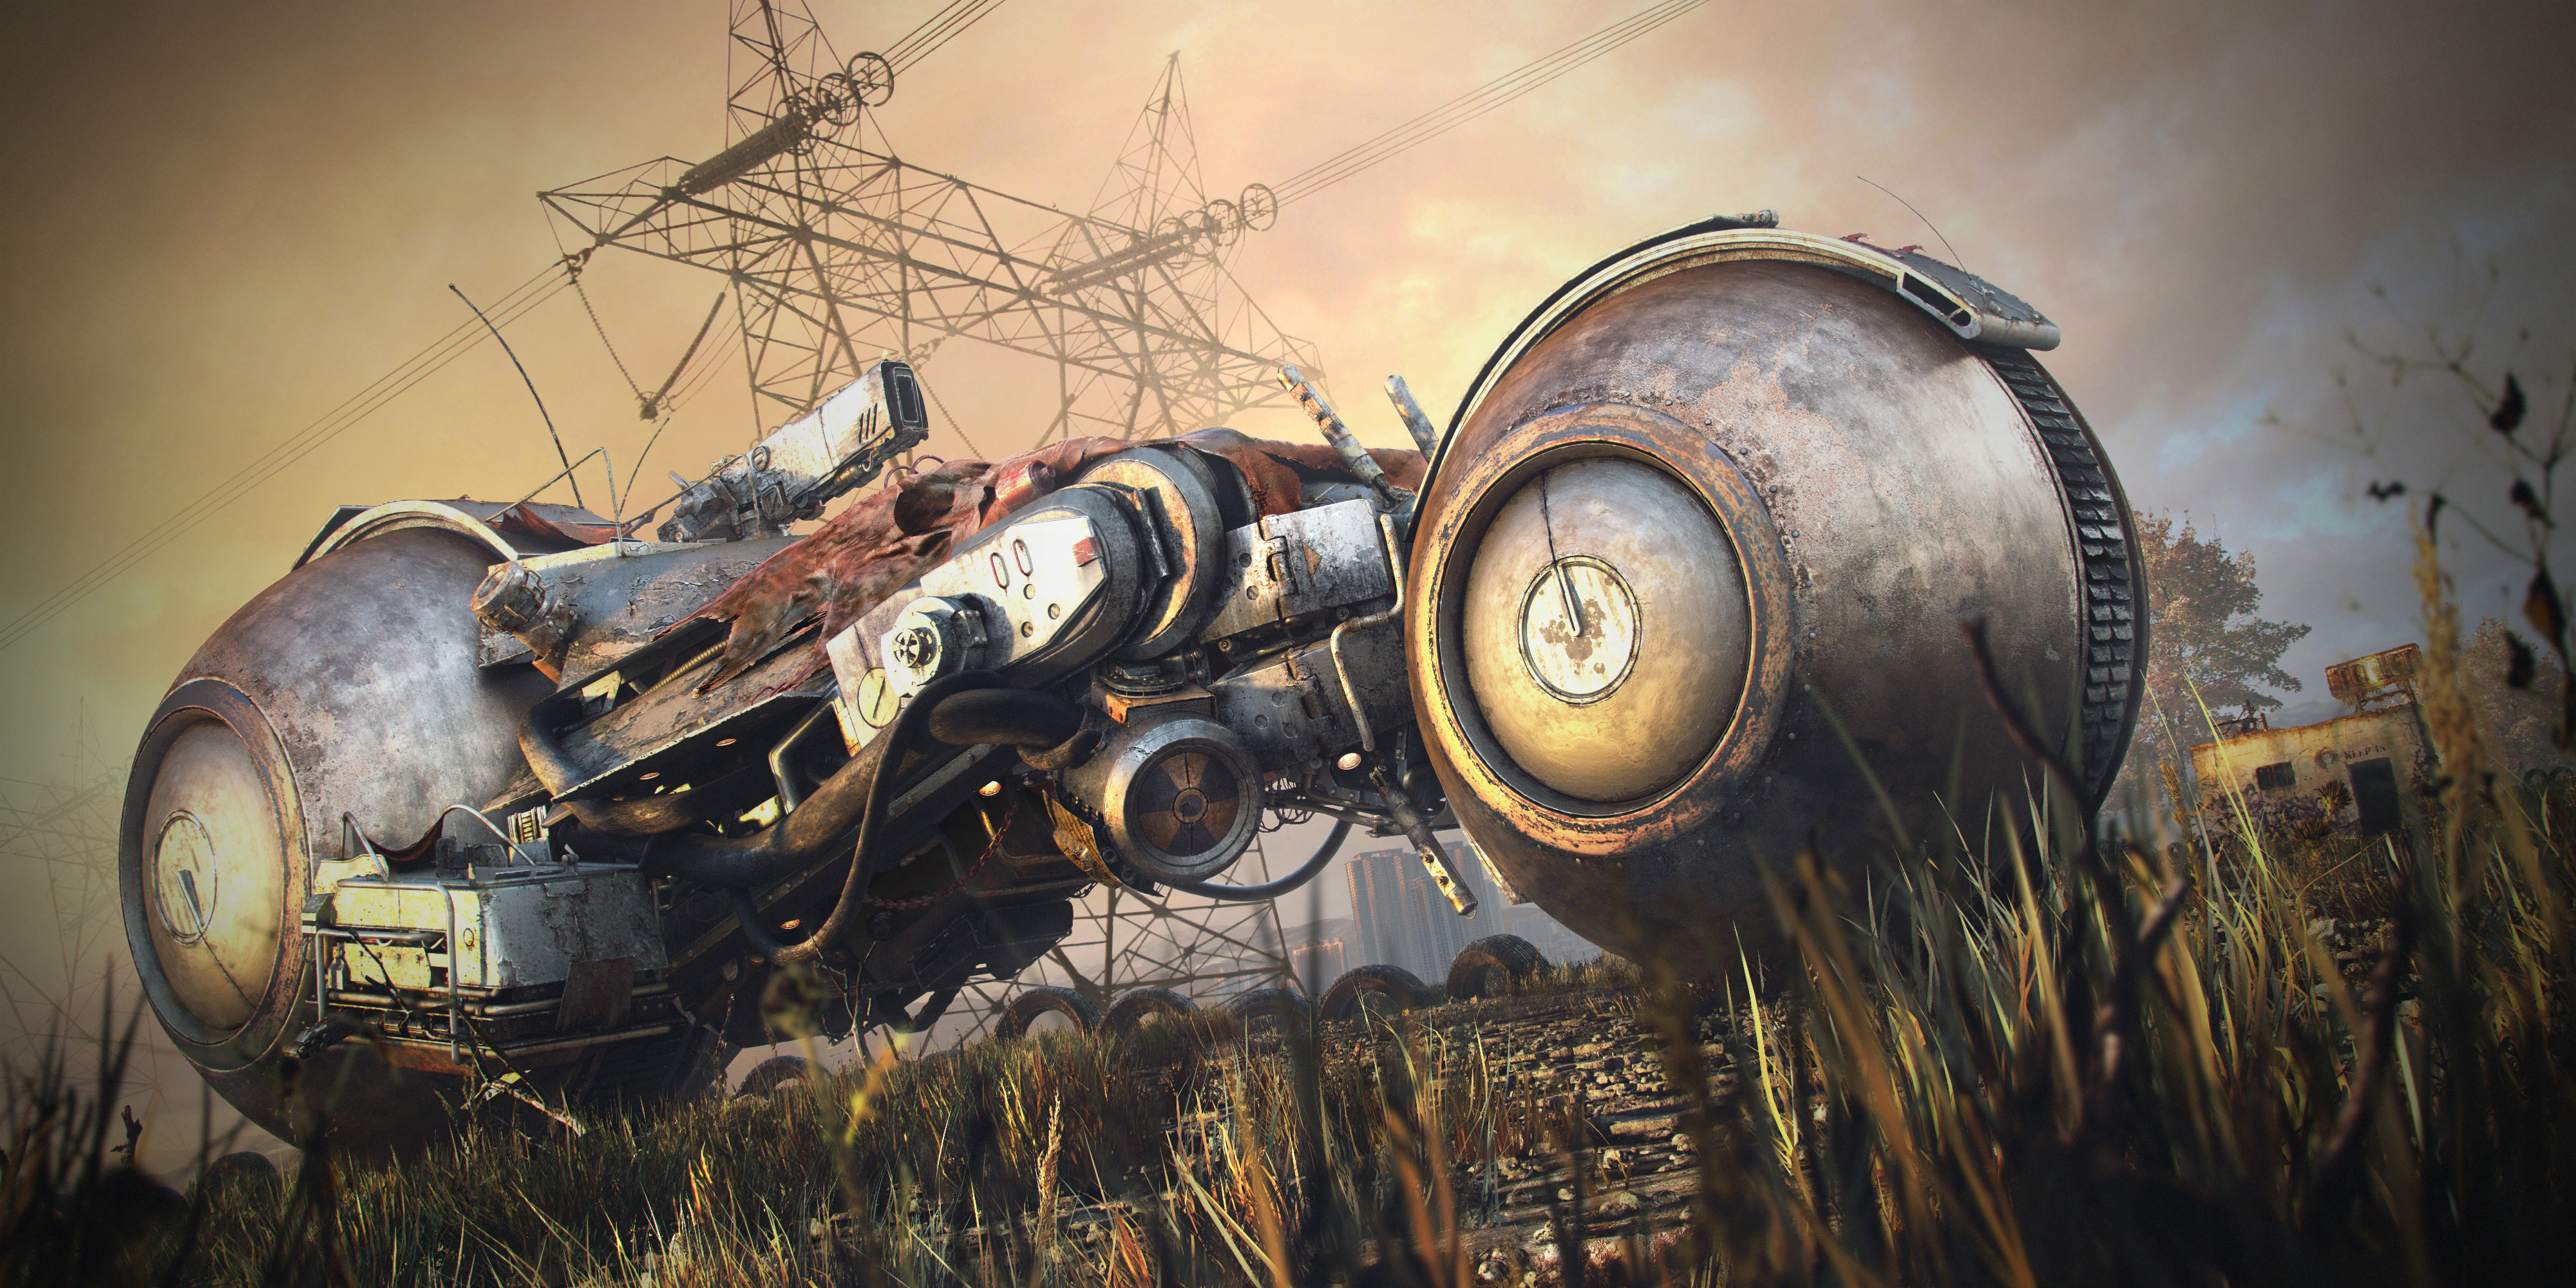 Vehicle Bikes Sphere Weapon Wires Grass Gun Rust Wheels Low Angle 4000x2000